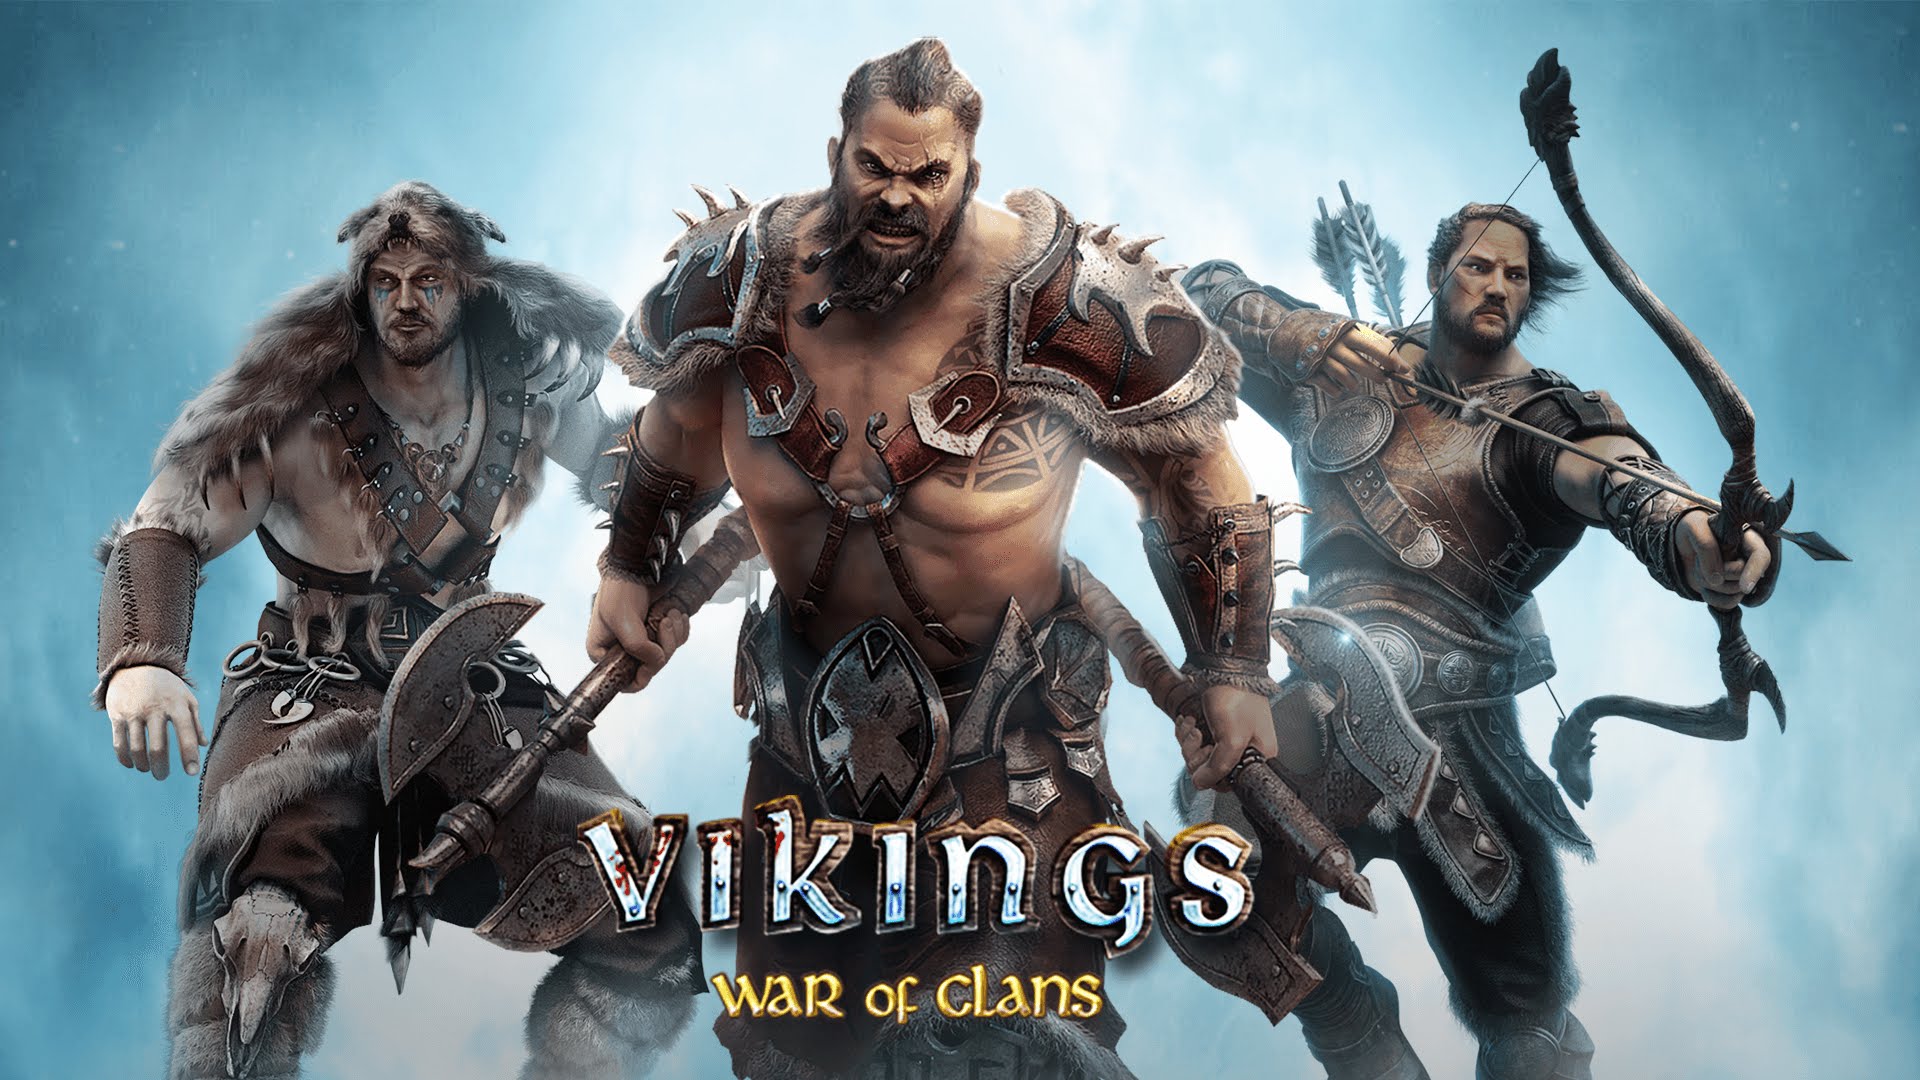 How to Play and Download Vikings: War of Clans